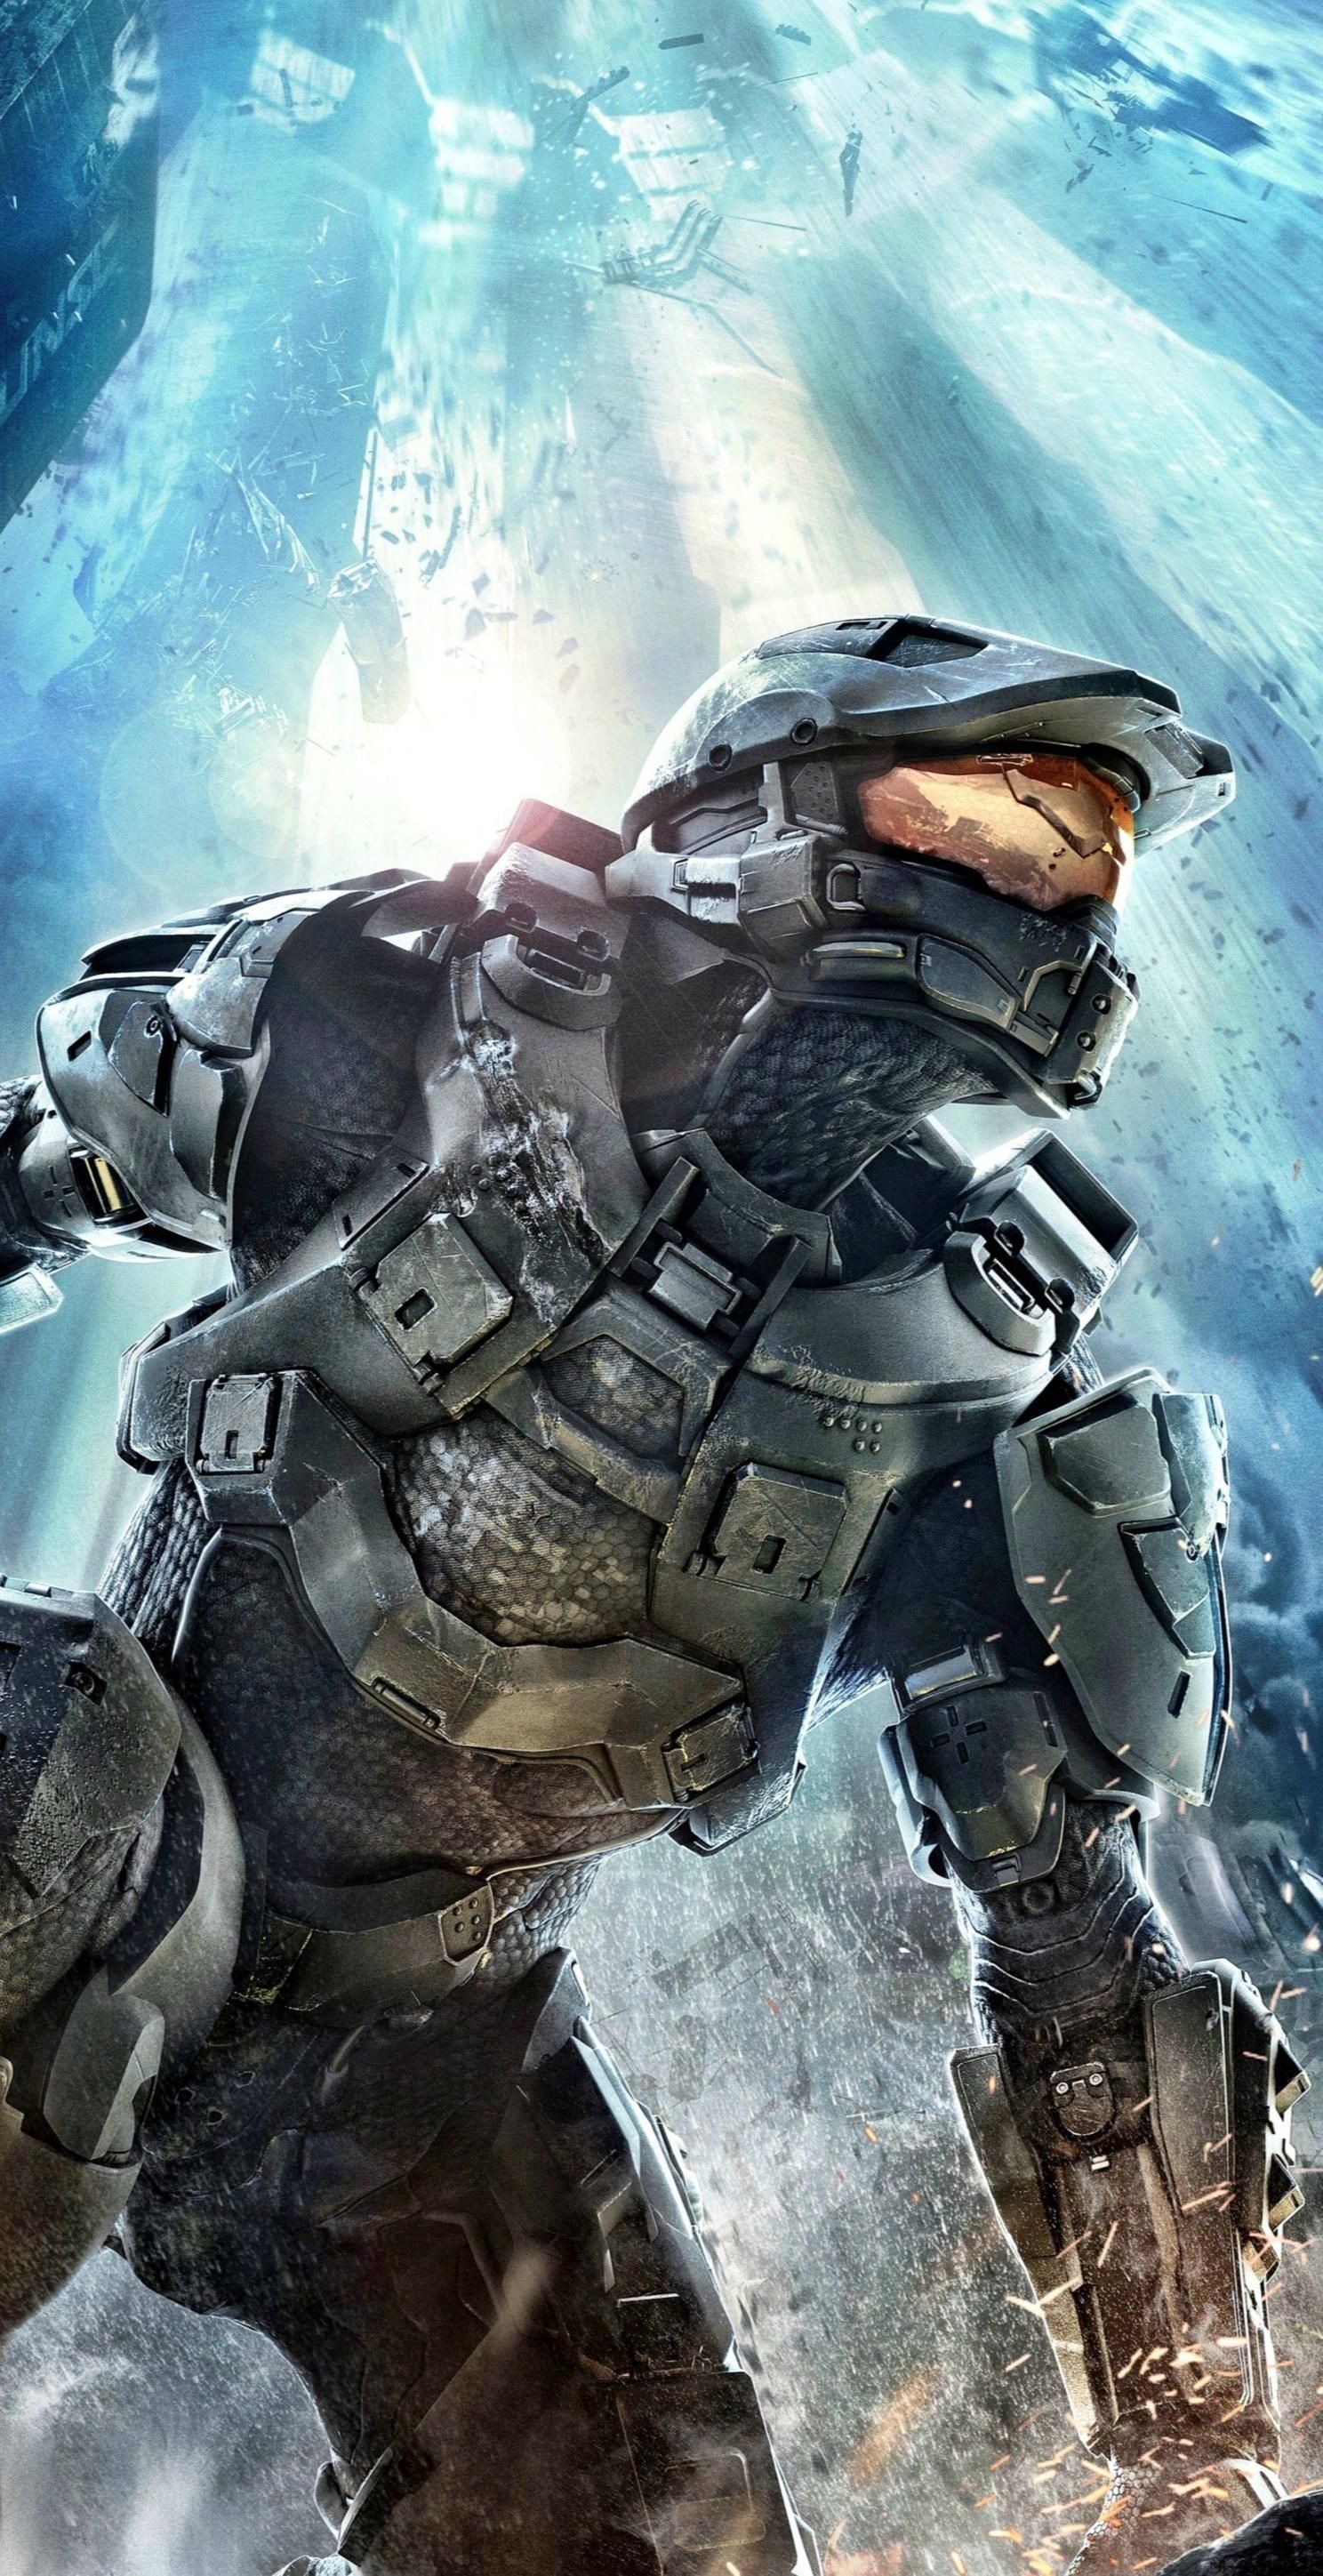 Halo 4 Wallpaper For Iphone - Halo Wallpaper Iphone , HD Wallpaper & Backgrounds